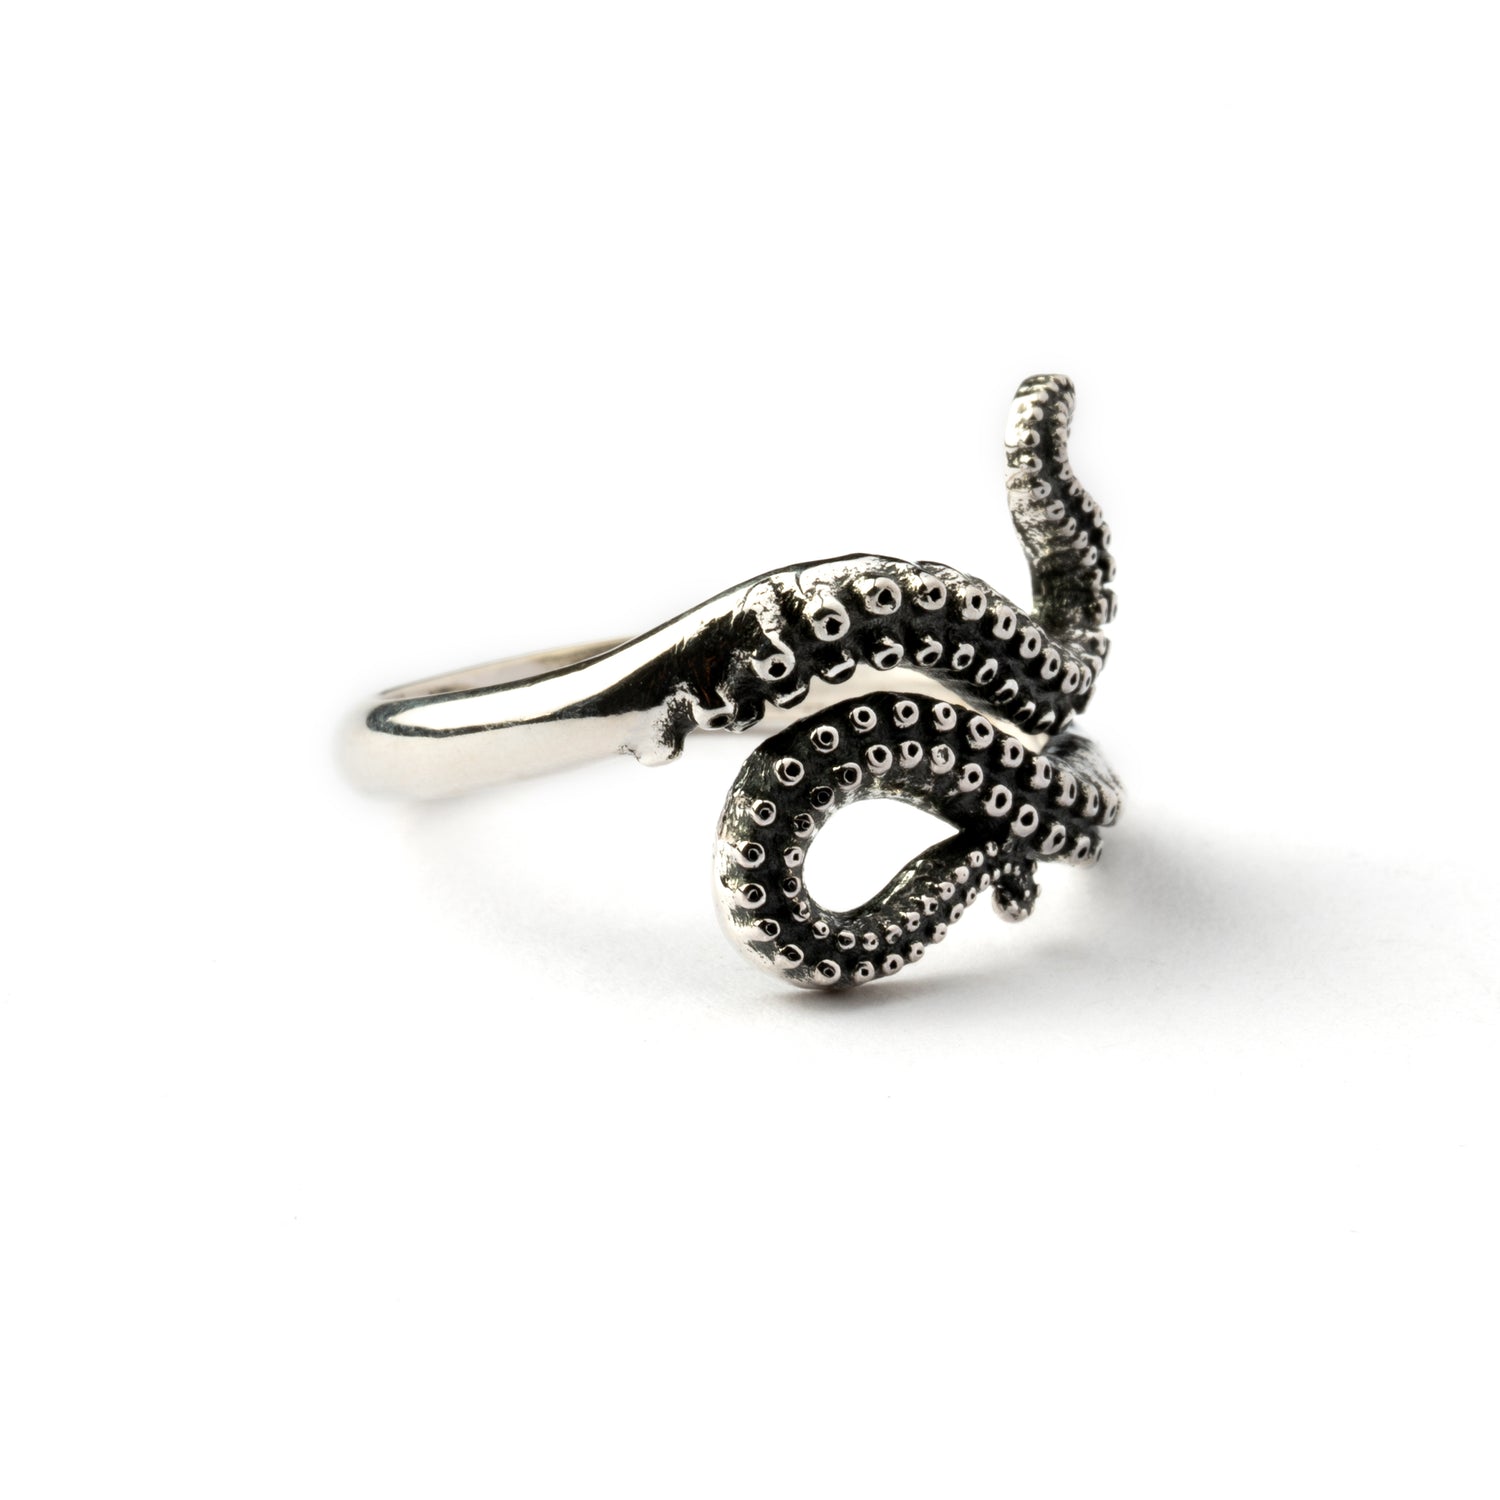 Silver octopus tentacle ring right side view